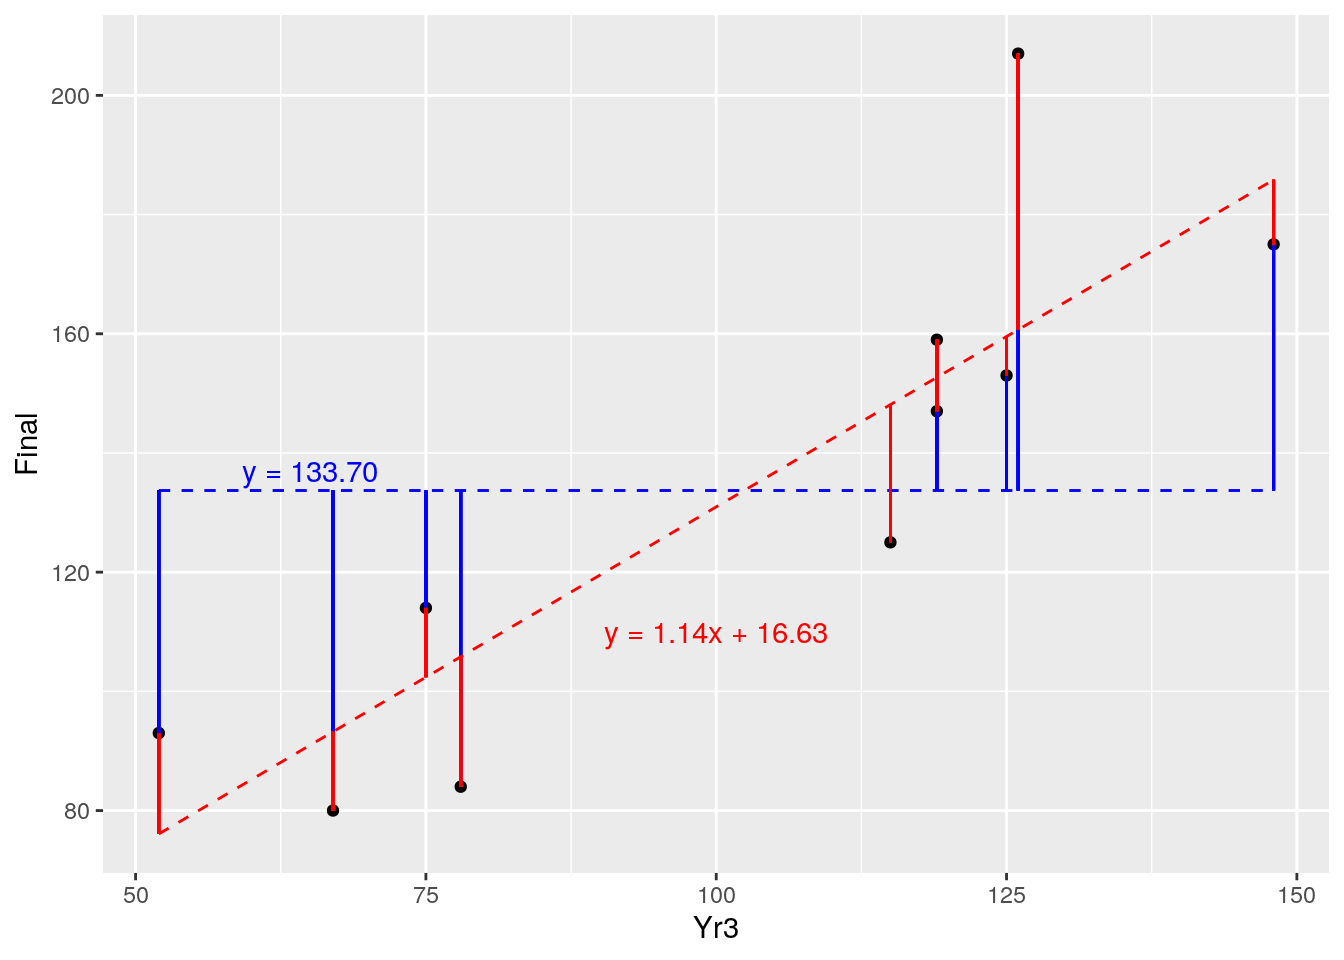 Comparison of residuals of fitted model (red) against random variable (blue)